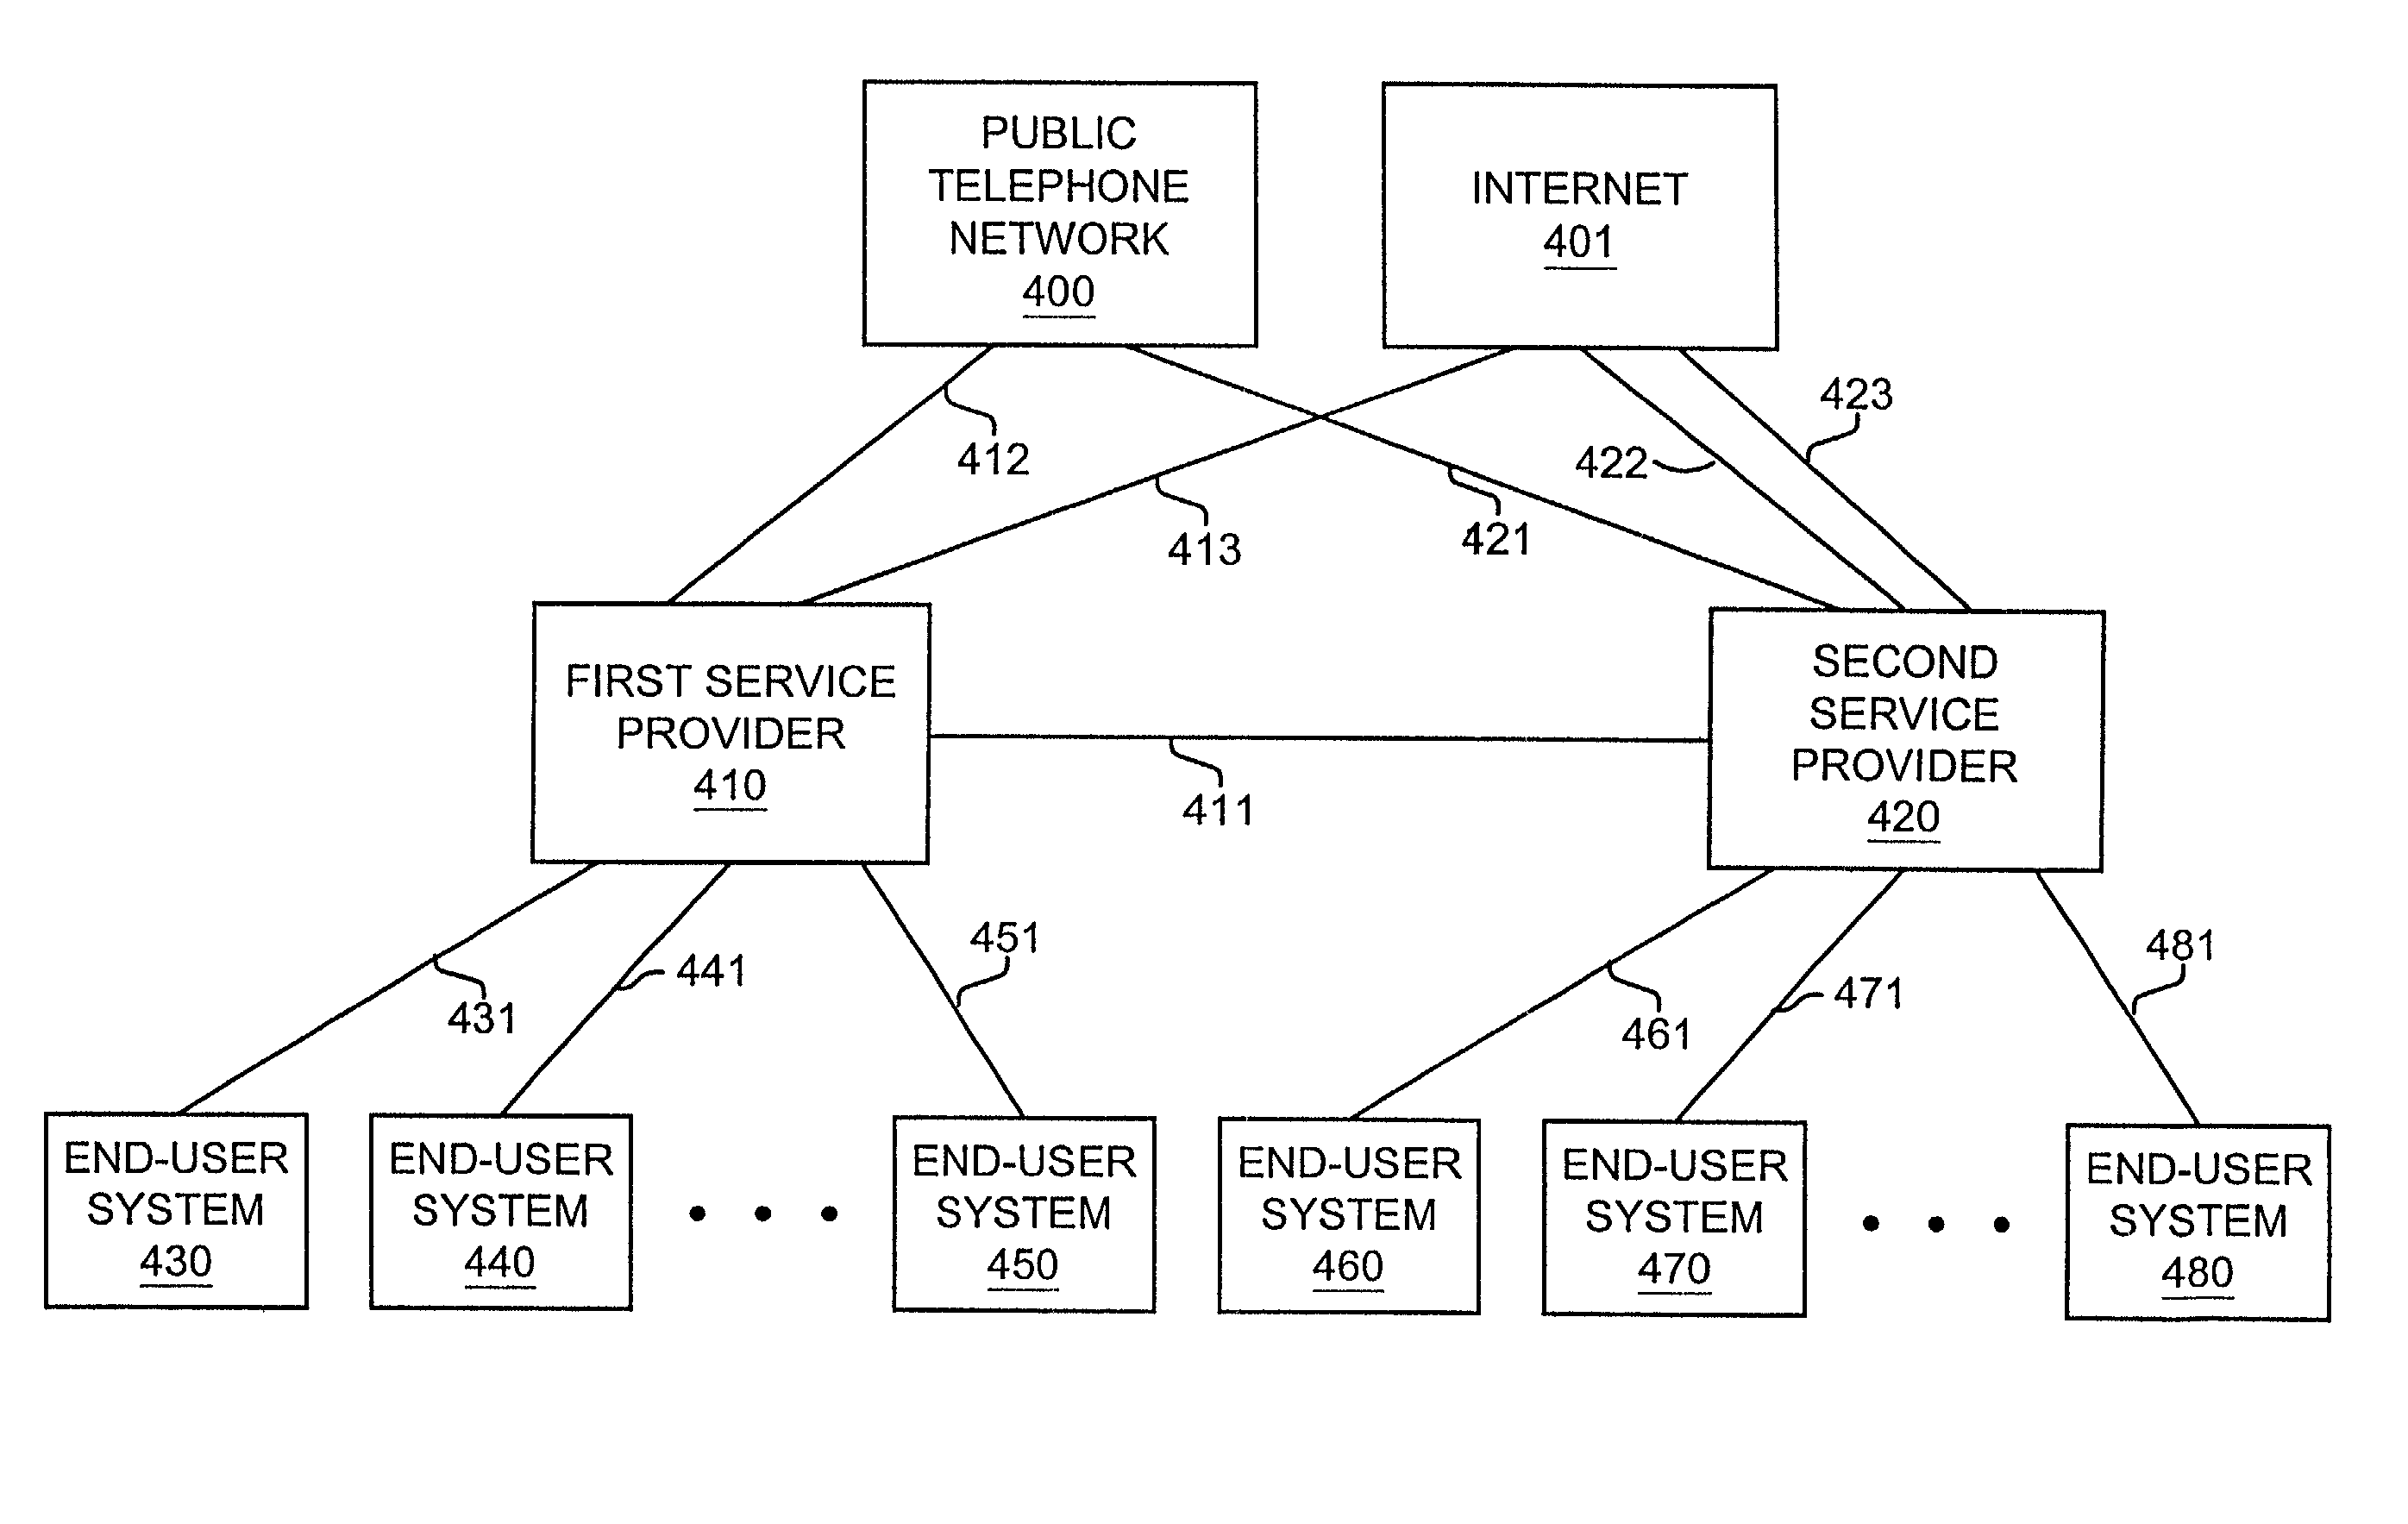 Establishing end-user communication services that use peer-to-peer internet protocol connections between service providers